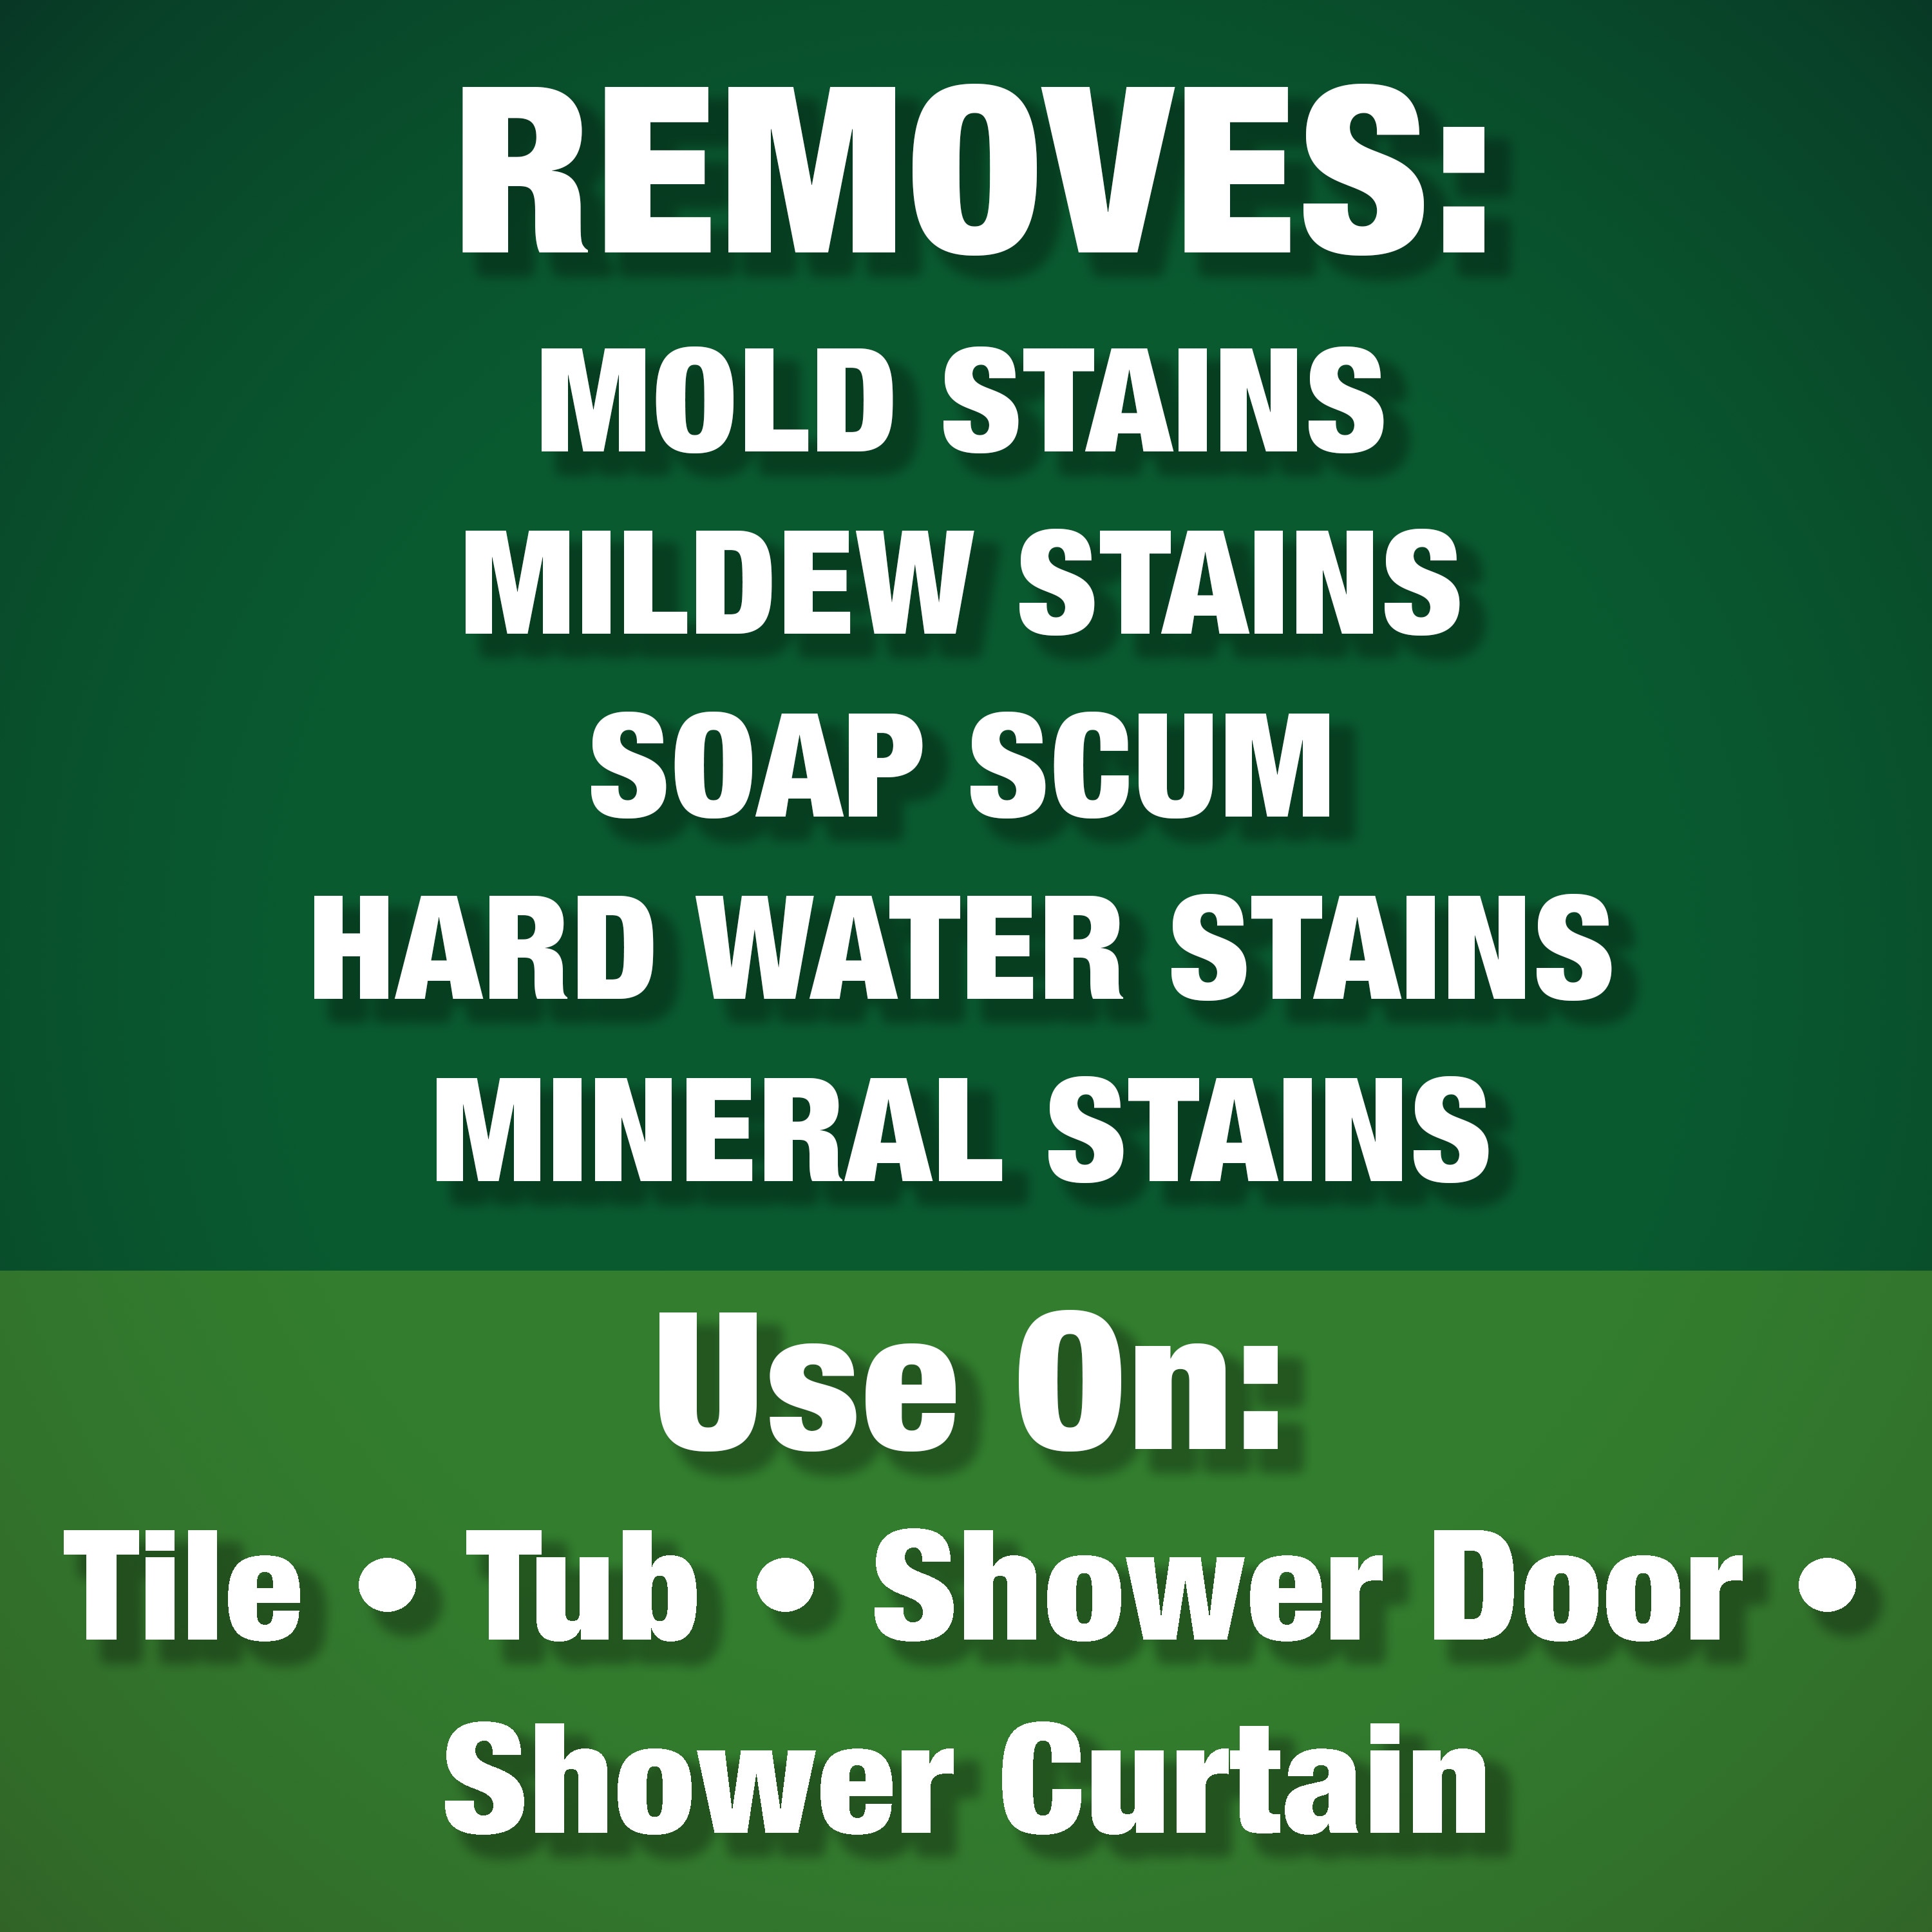 Mold Armor 32 oz. Mold and Mildew Killer and Quick Stain Remover